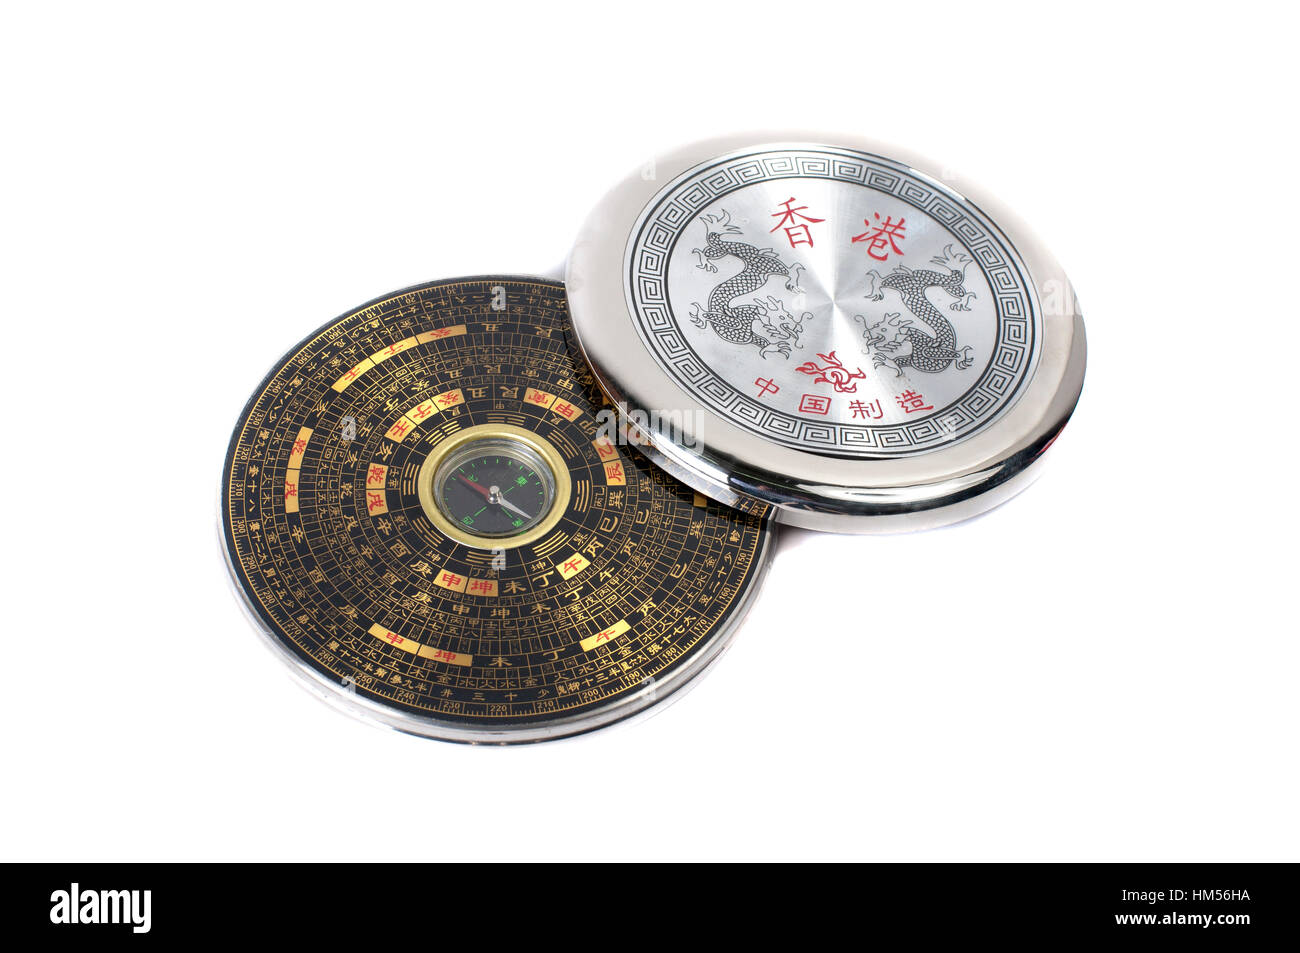 Chinese magnetic compass - Luopan. Isolated on white background. Stock Photo